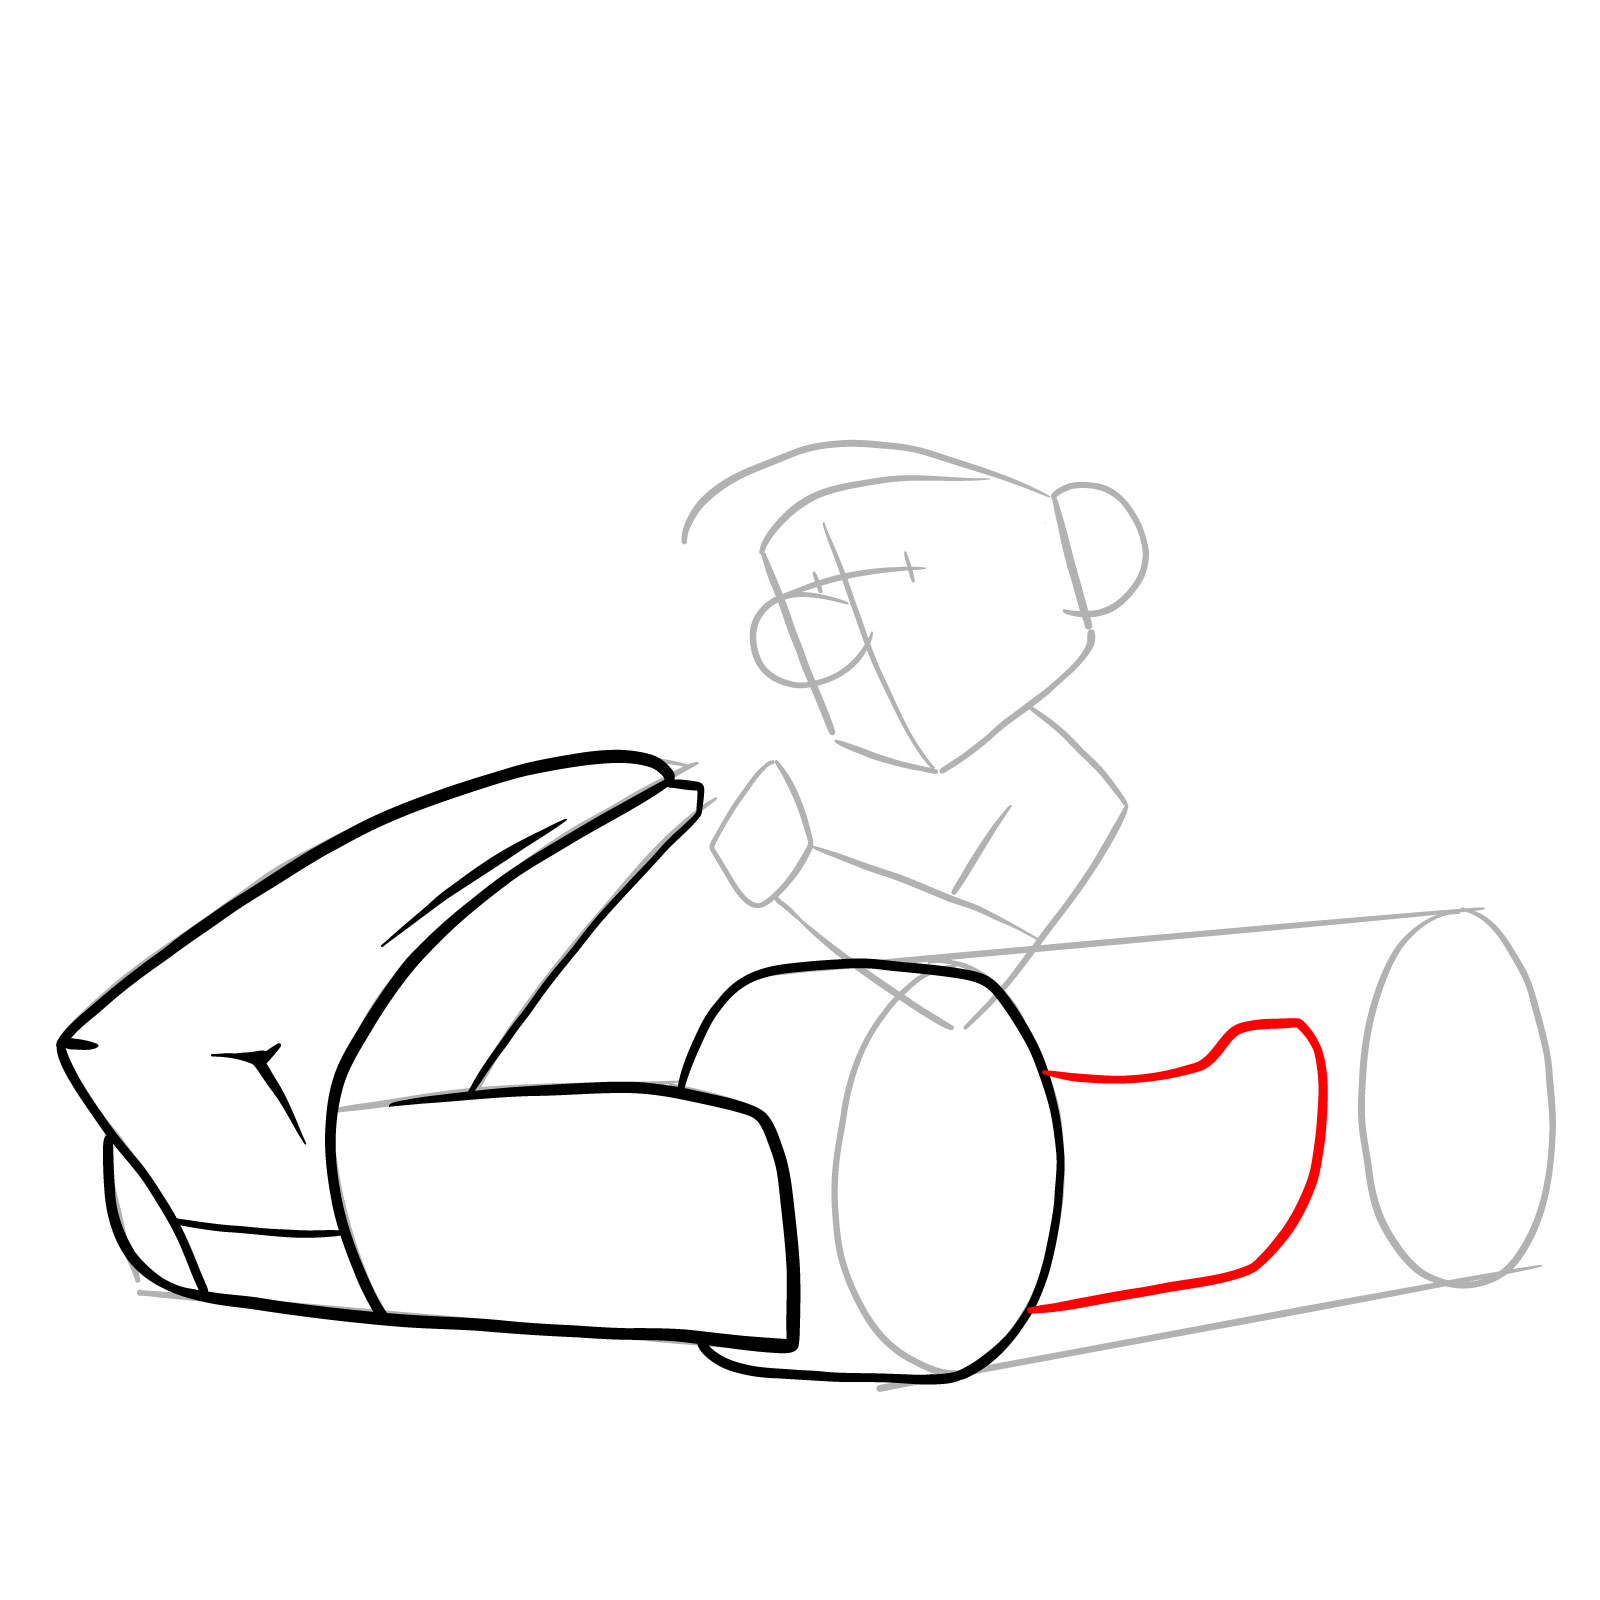 How to draw Race Traitors Mario - step 09